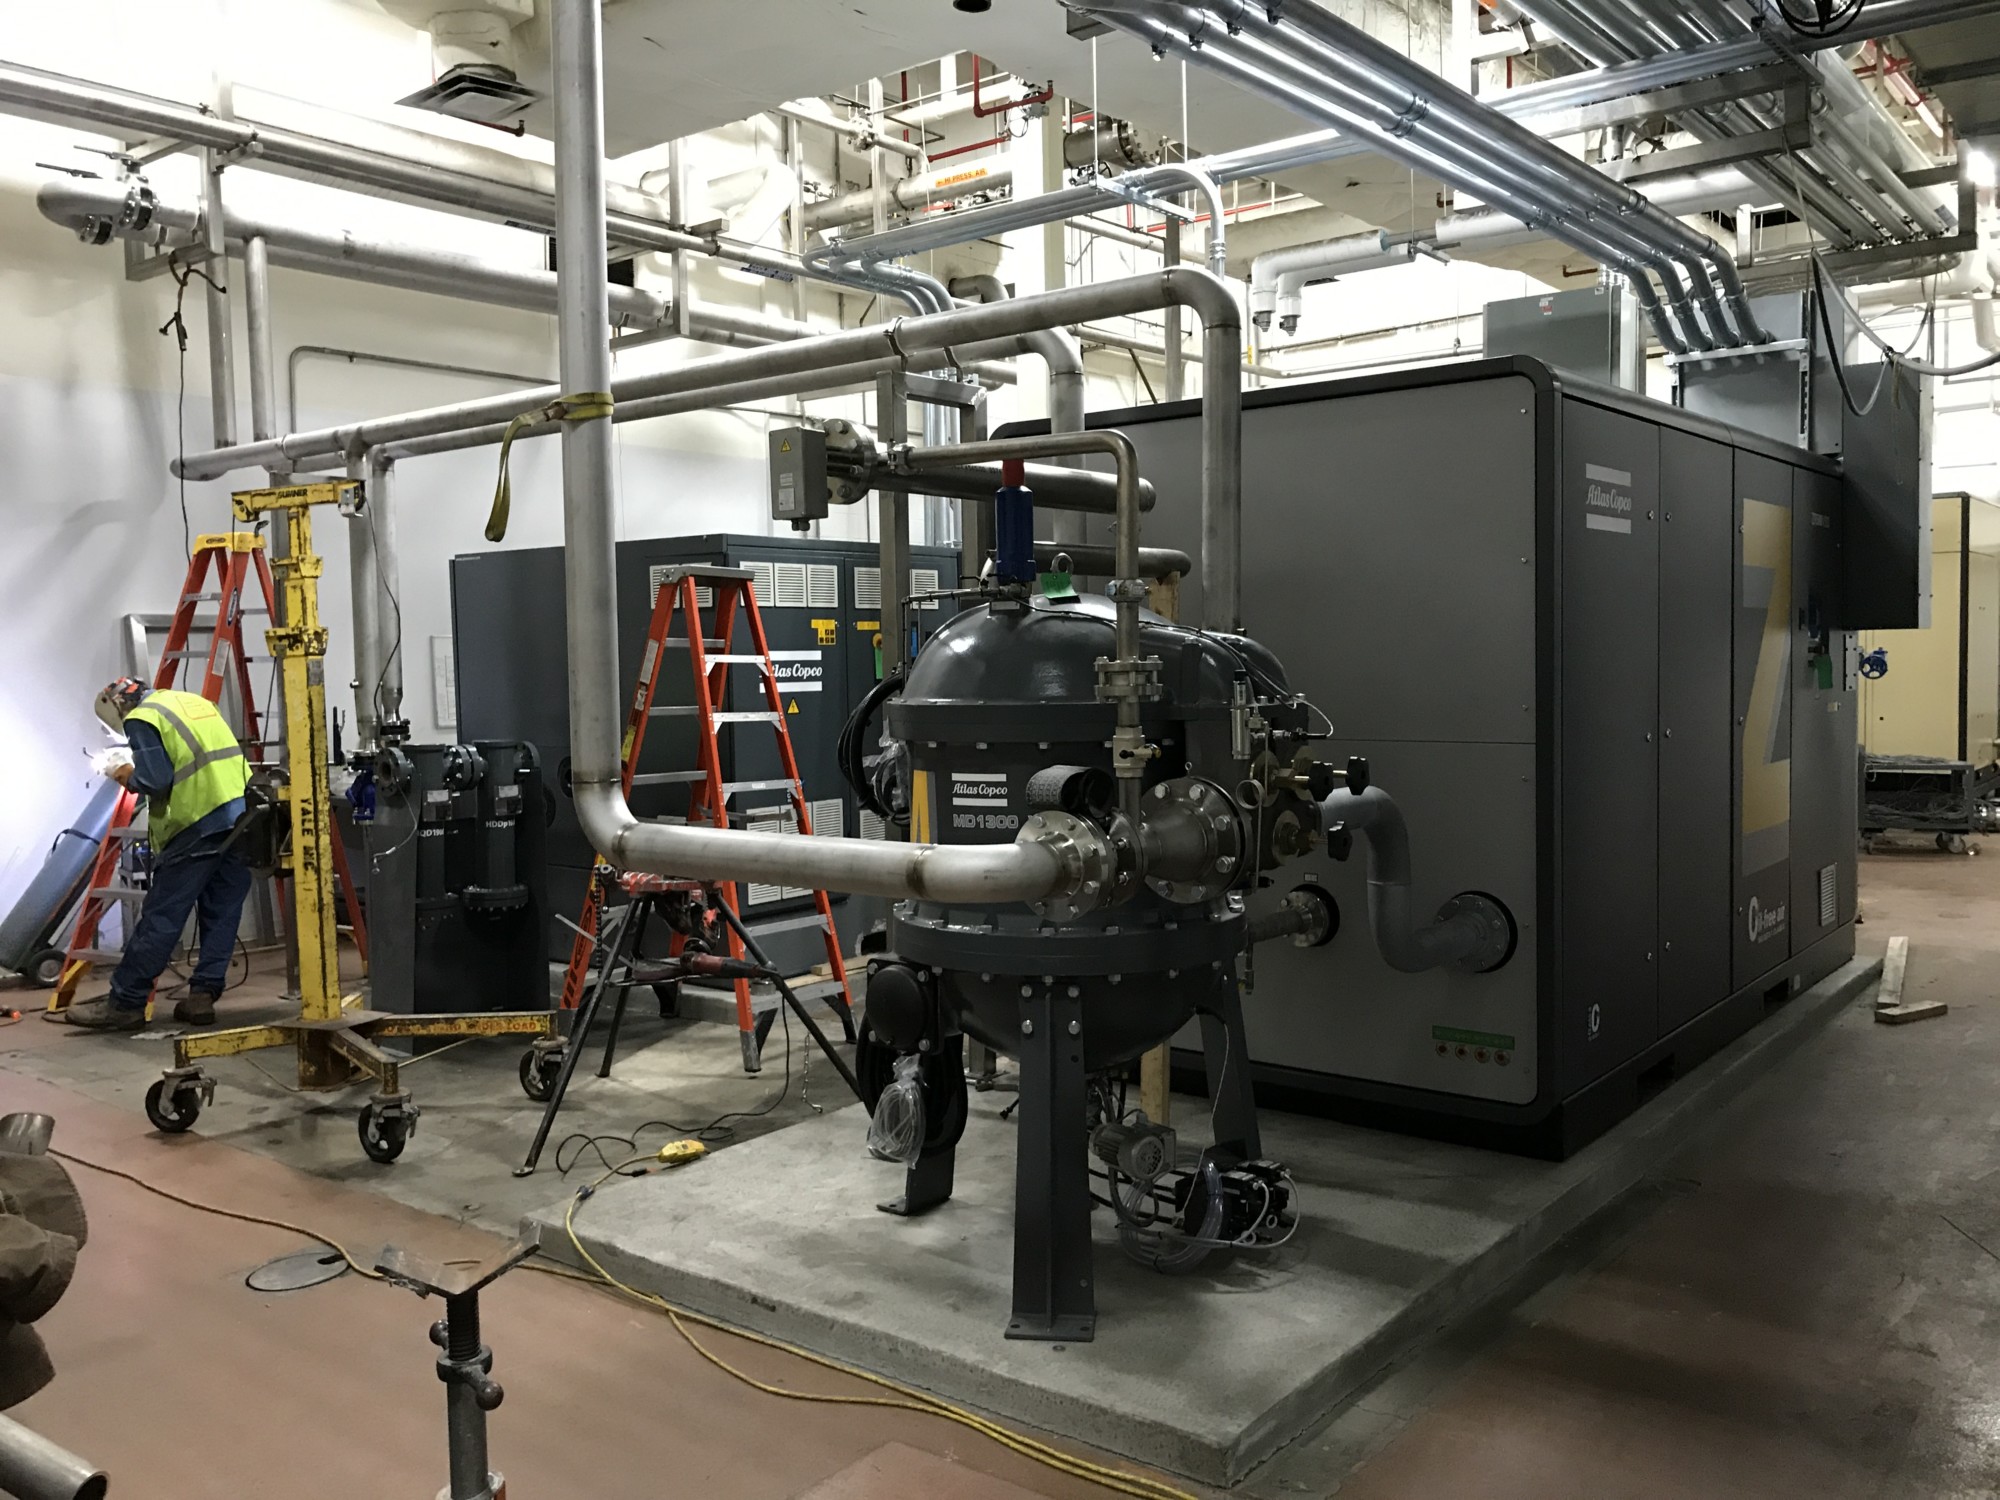 After: Yale Mechanical installed a new 250-ton, glycol-filled cooling system for the air compressors with welded stainless steel schedule 10 pipe.